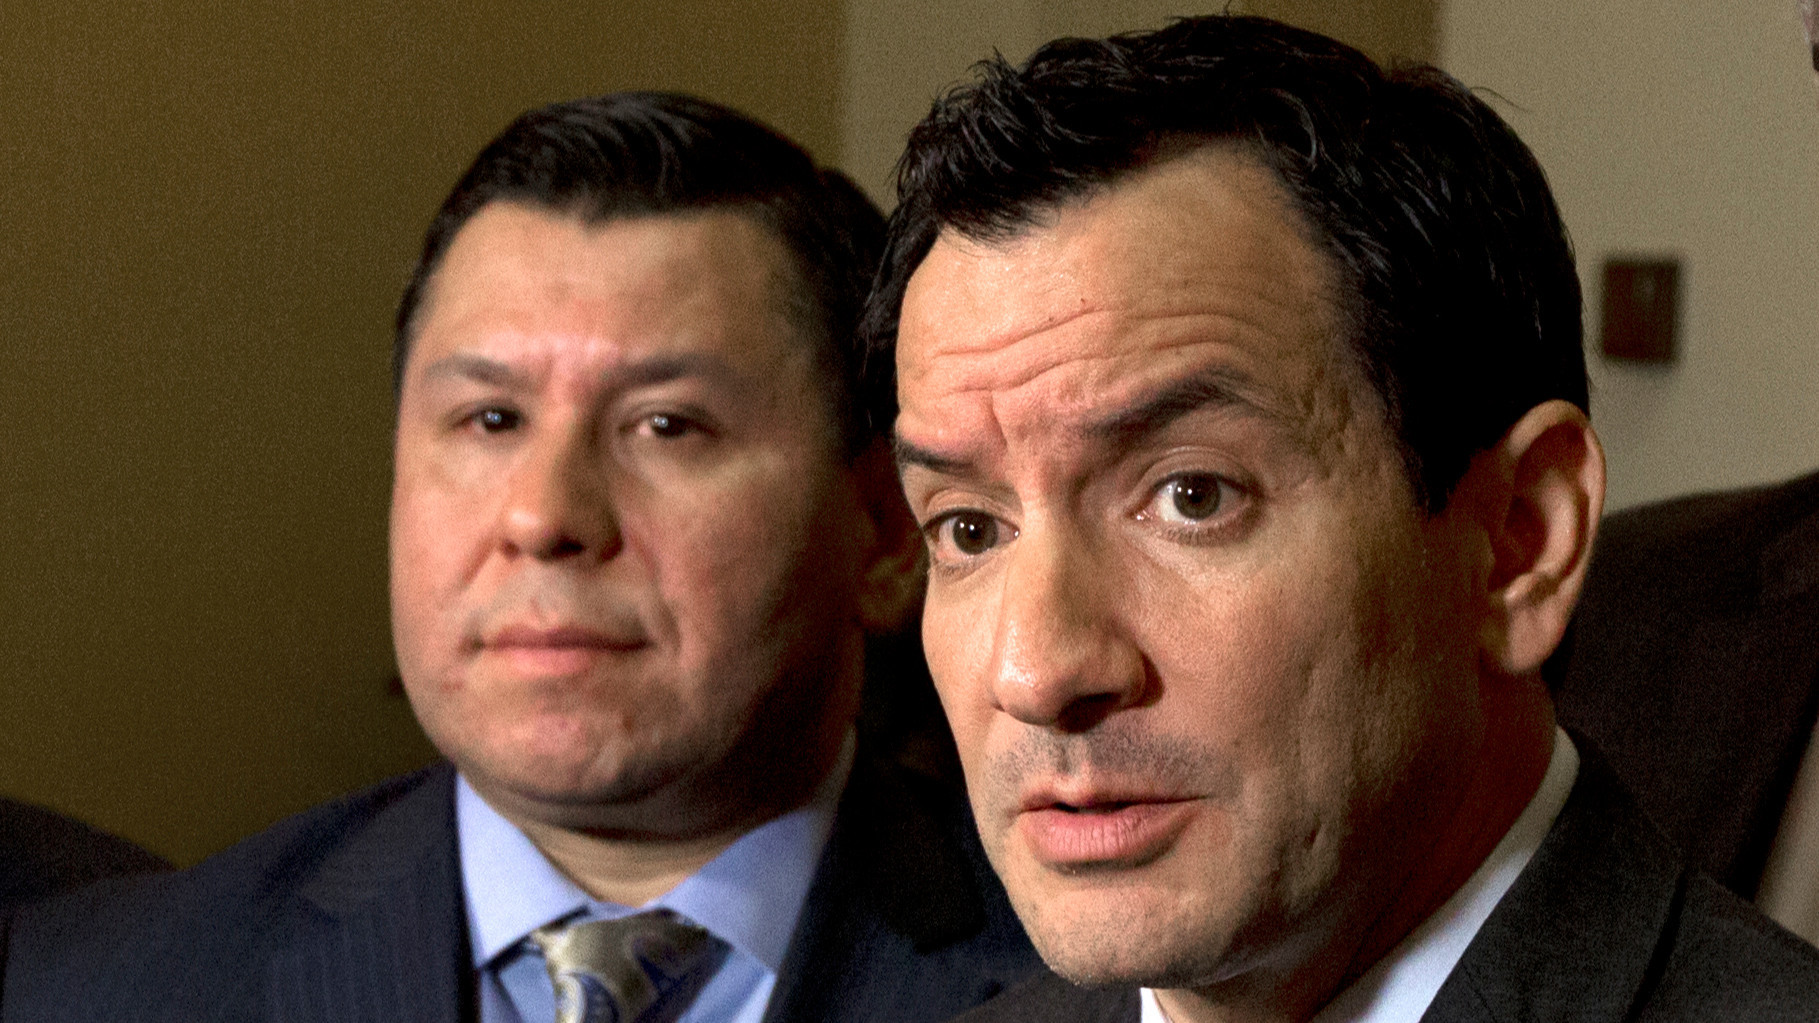 Assemblyman Anthony Rendon (D-Paramount), right, was skeptical climate legislation could pass this year, but ultimately threw his support behind the effort.